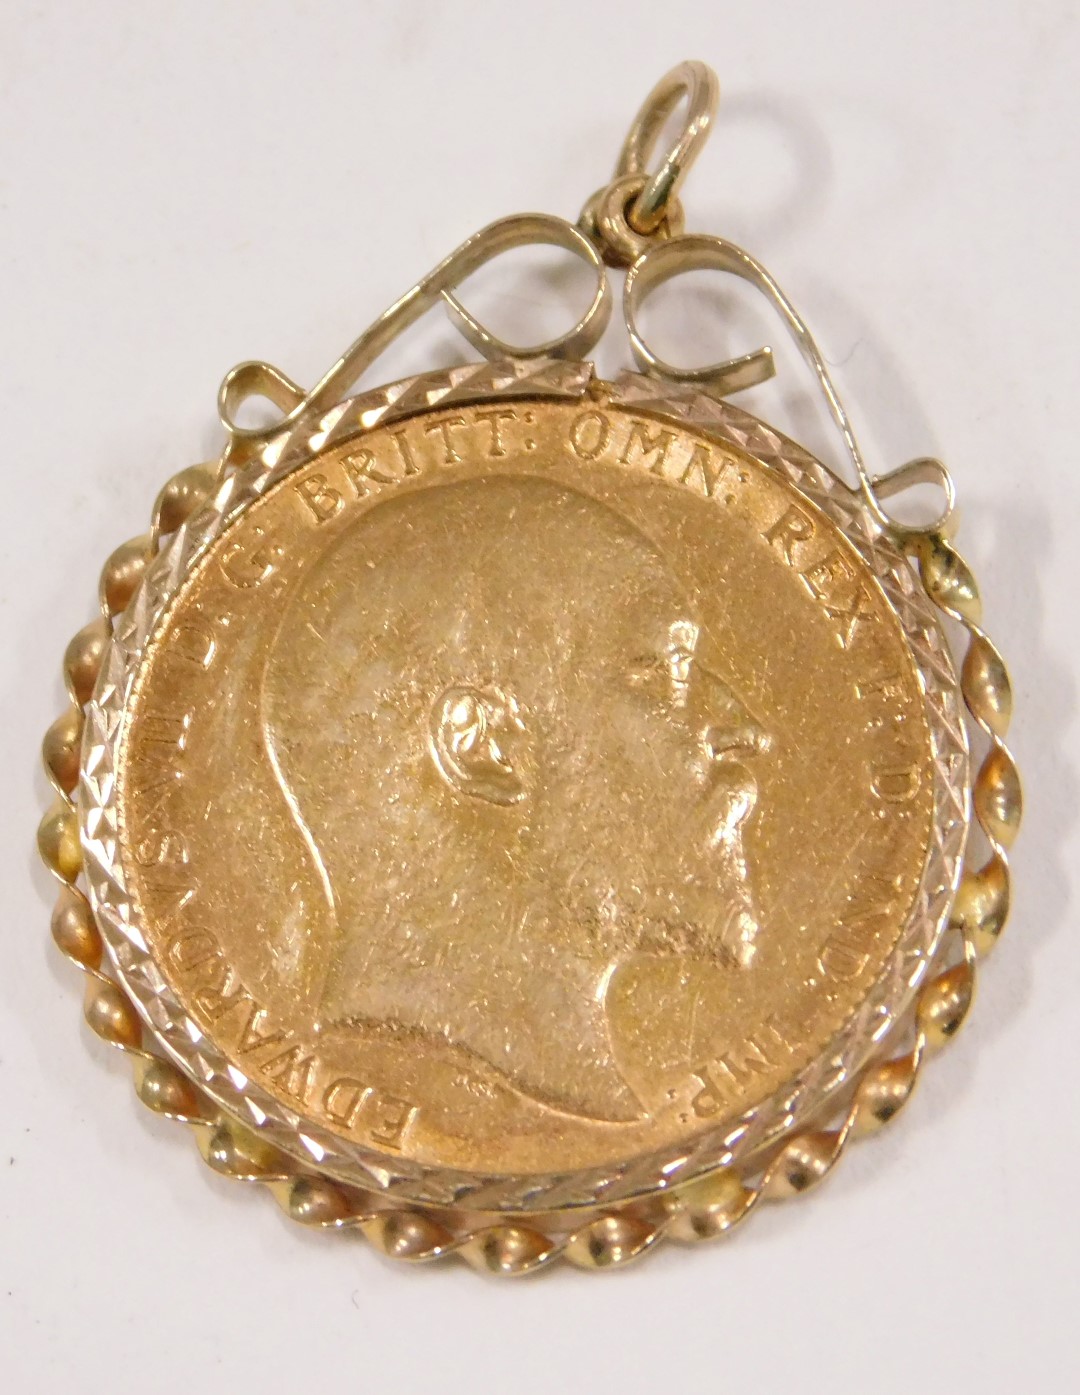 An Edward VII full gold sovereign pendant, dated 1910, in a 9ct gold twist work pendant mount, 9.1g - Image 2 of 3